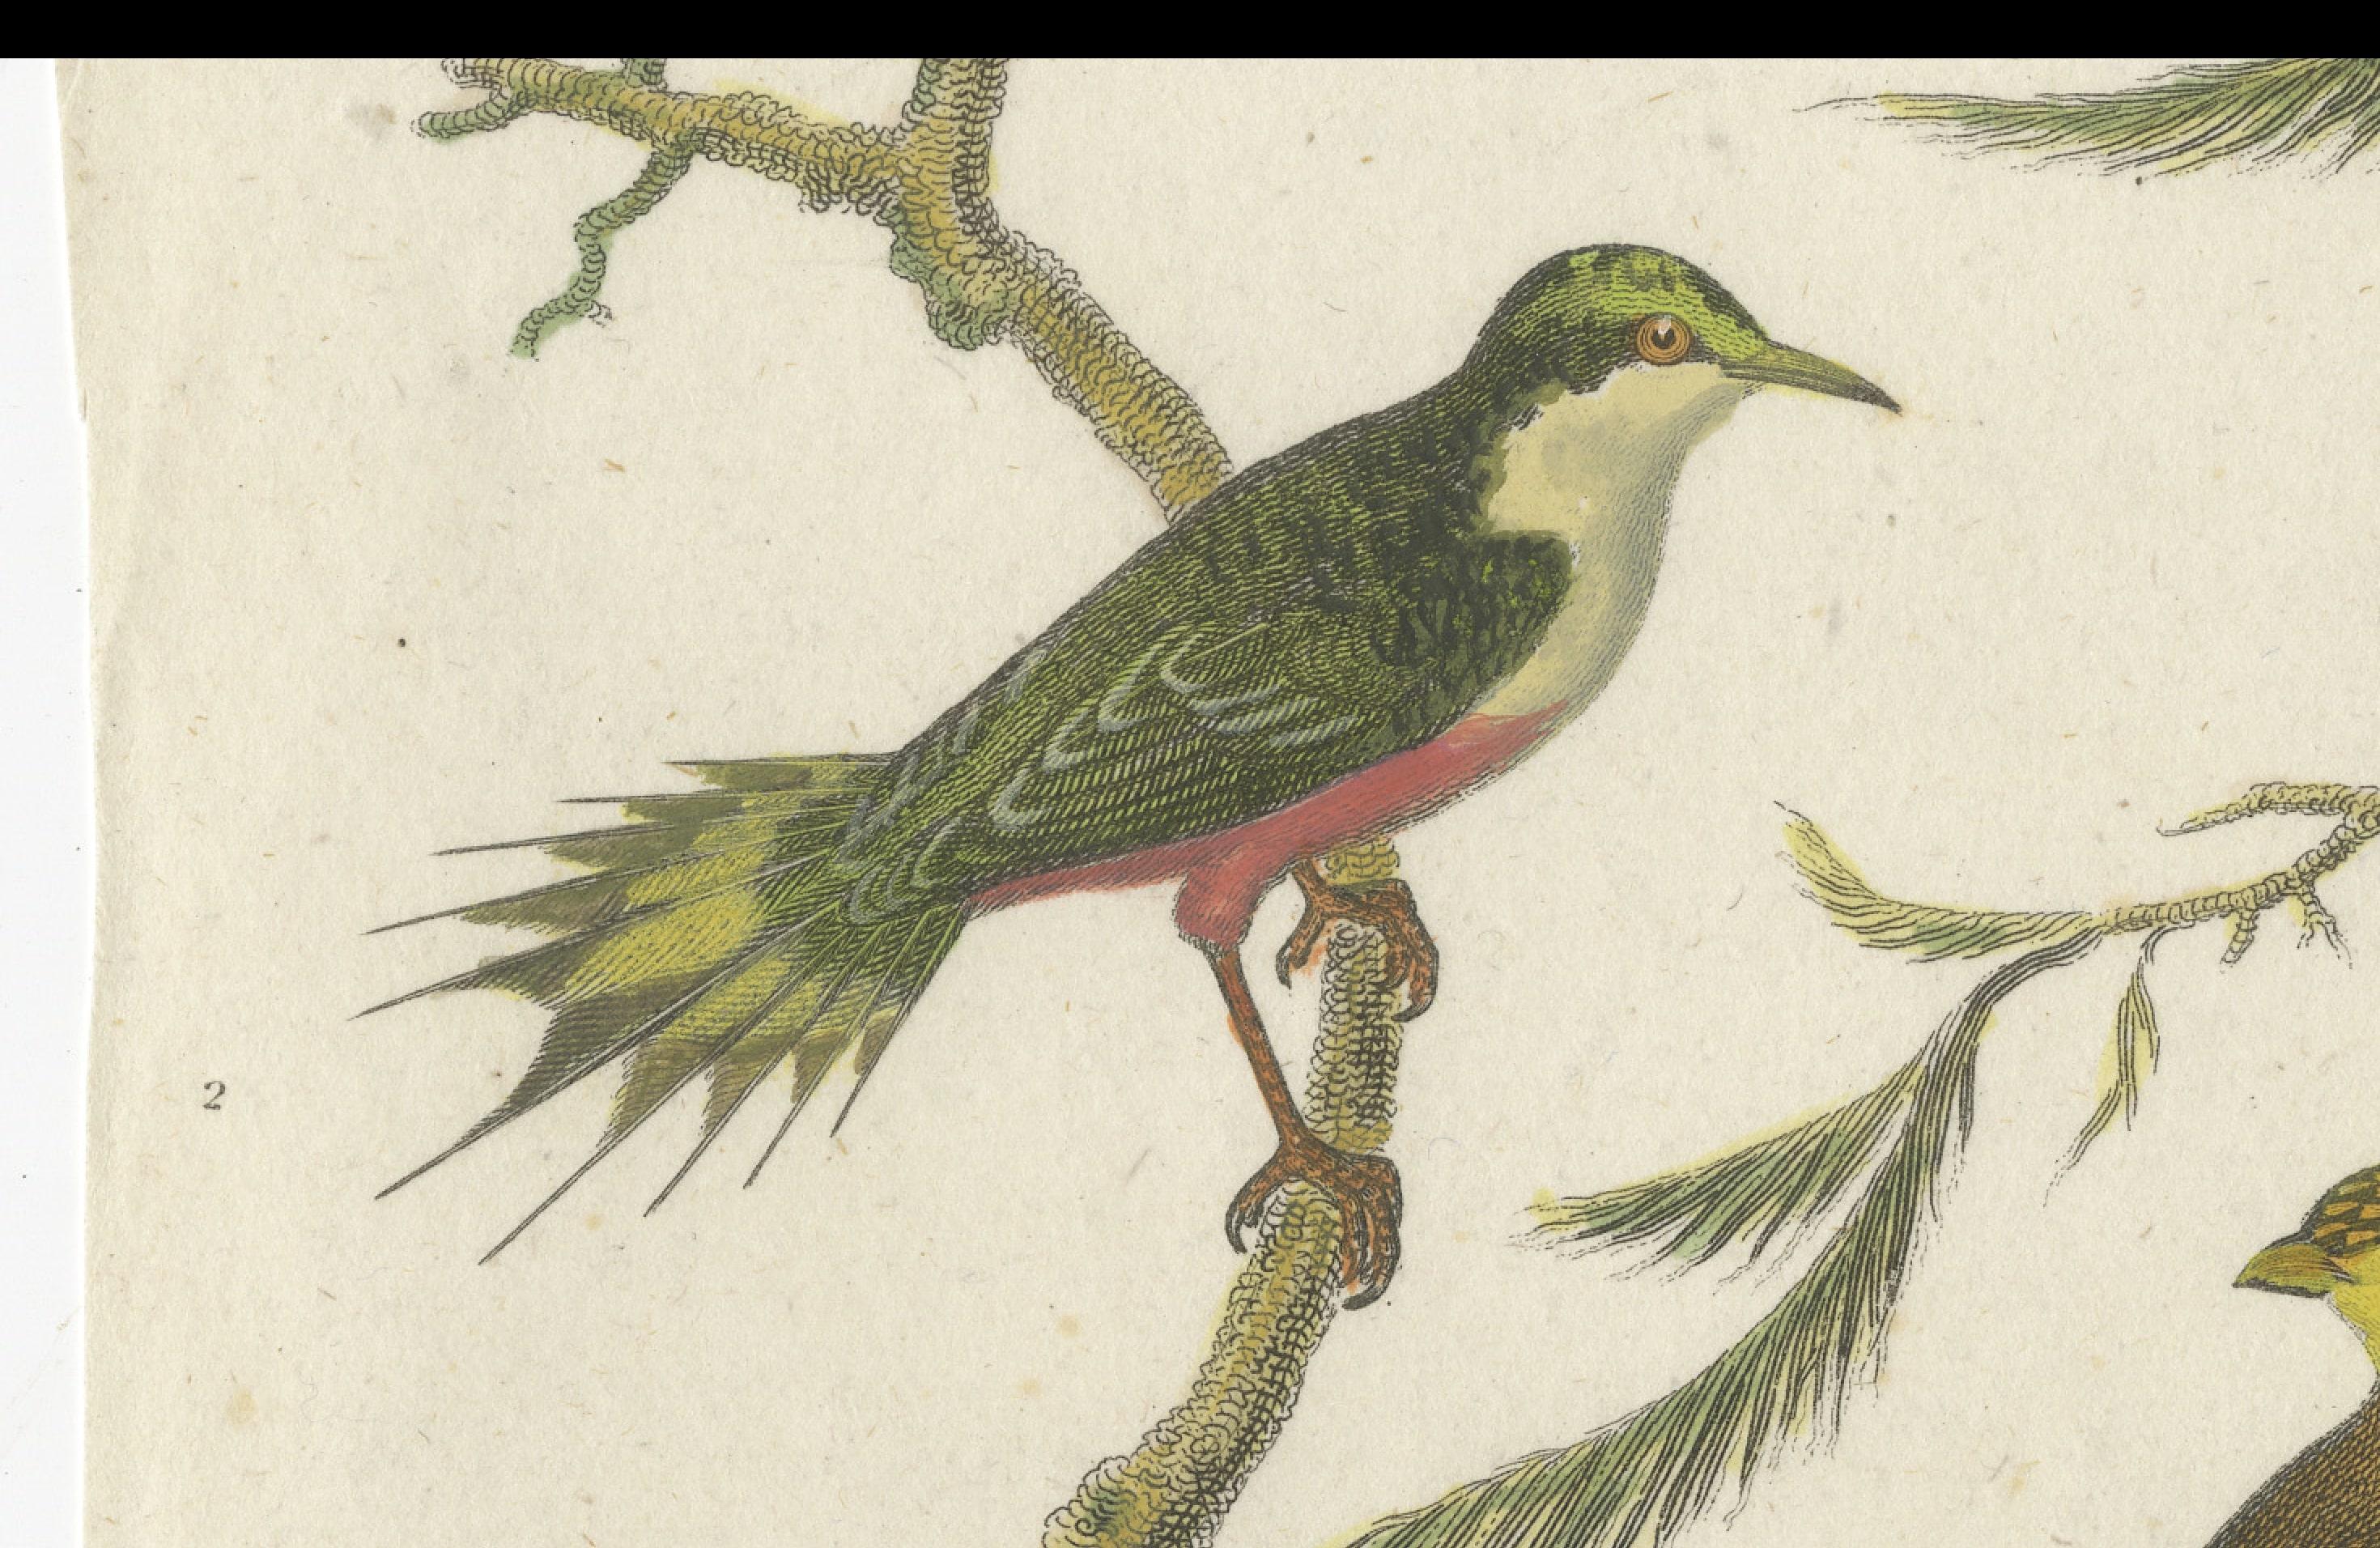 Antike 1811 Ornithologie Hand-Colored Print im Zustand „Gut“ im Angebot in Langweer, NL